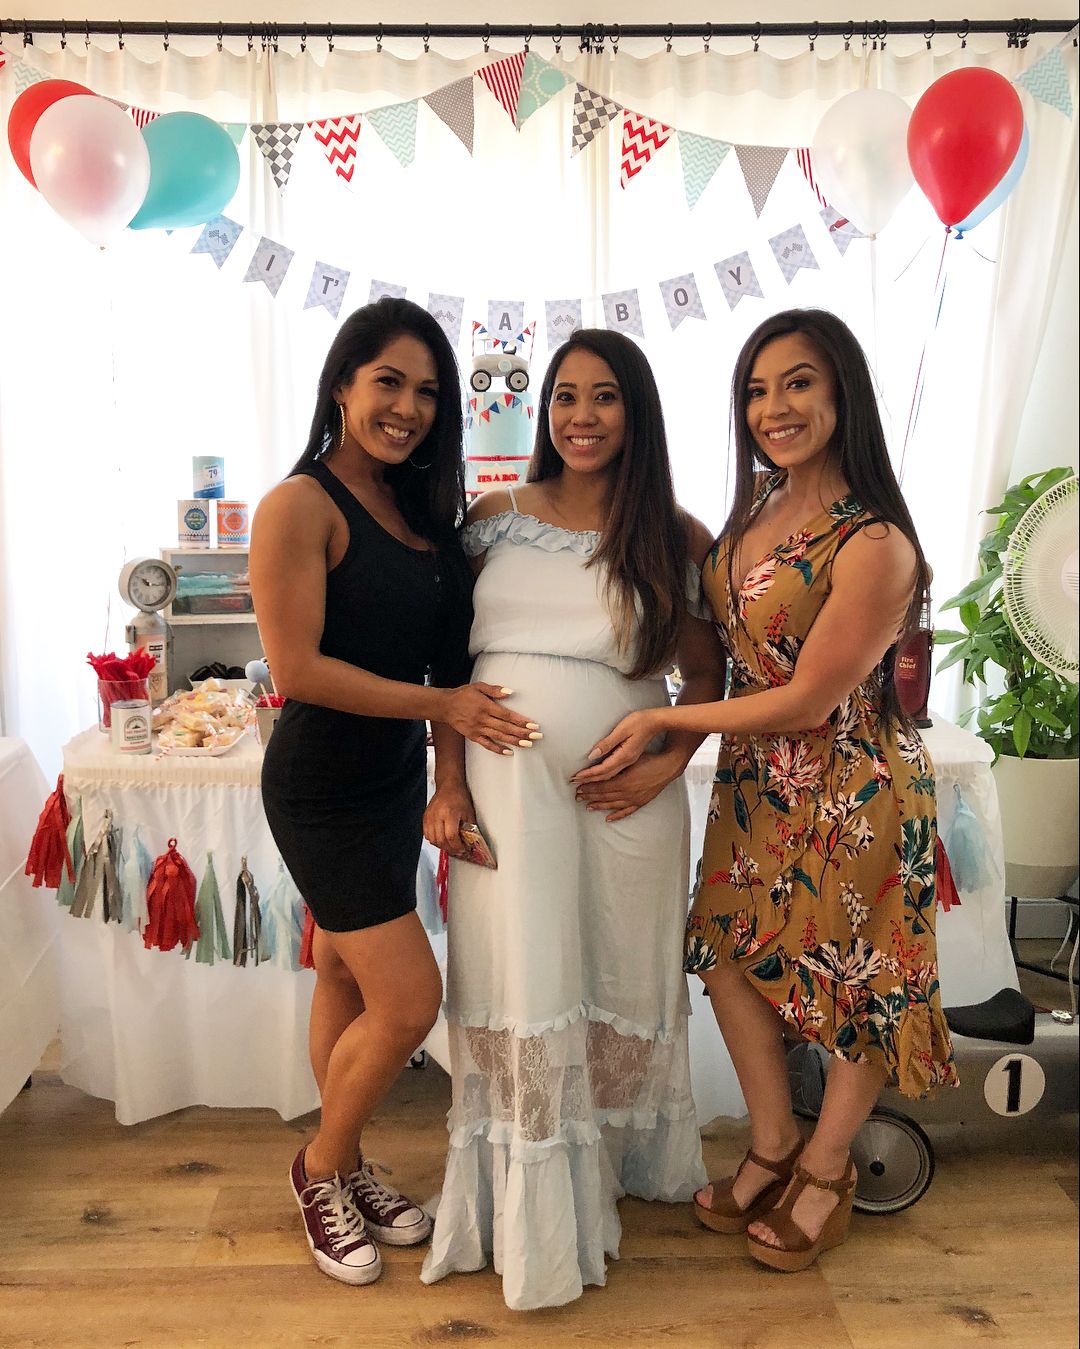 Full Size of Baby Shower:what To Wear To A Baby Shower In October Mom And Dad Baby Shower Outfits Petite Maternity Dresses For Baby Shower Maternity Blouses For Baby Shower Long Maternity Dresses Maternity Dresses For Baby Shower Celebrity Baby Shower Dresses Maternity Blouses For Baby Shower